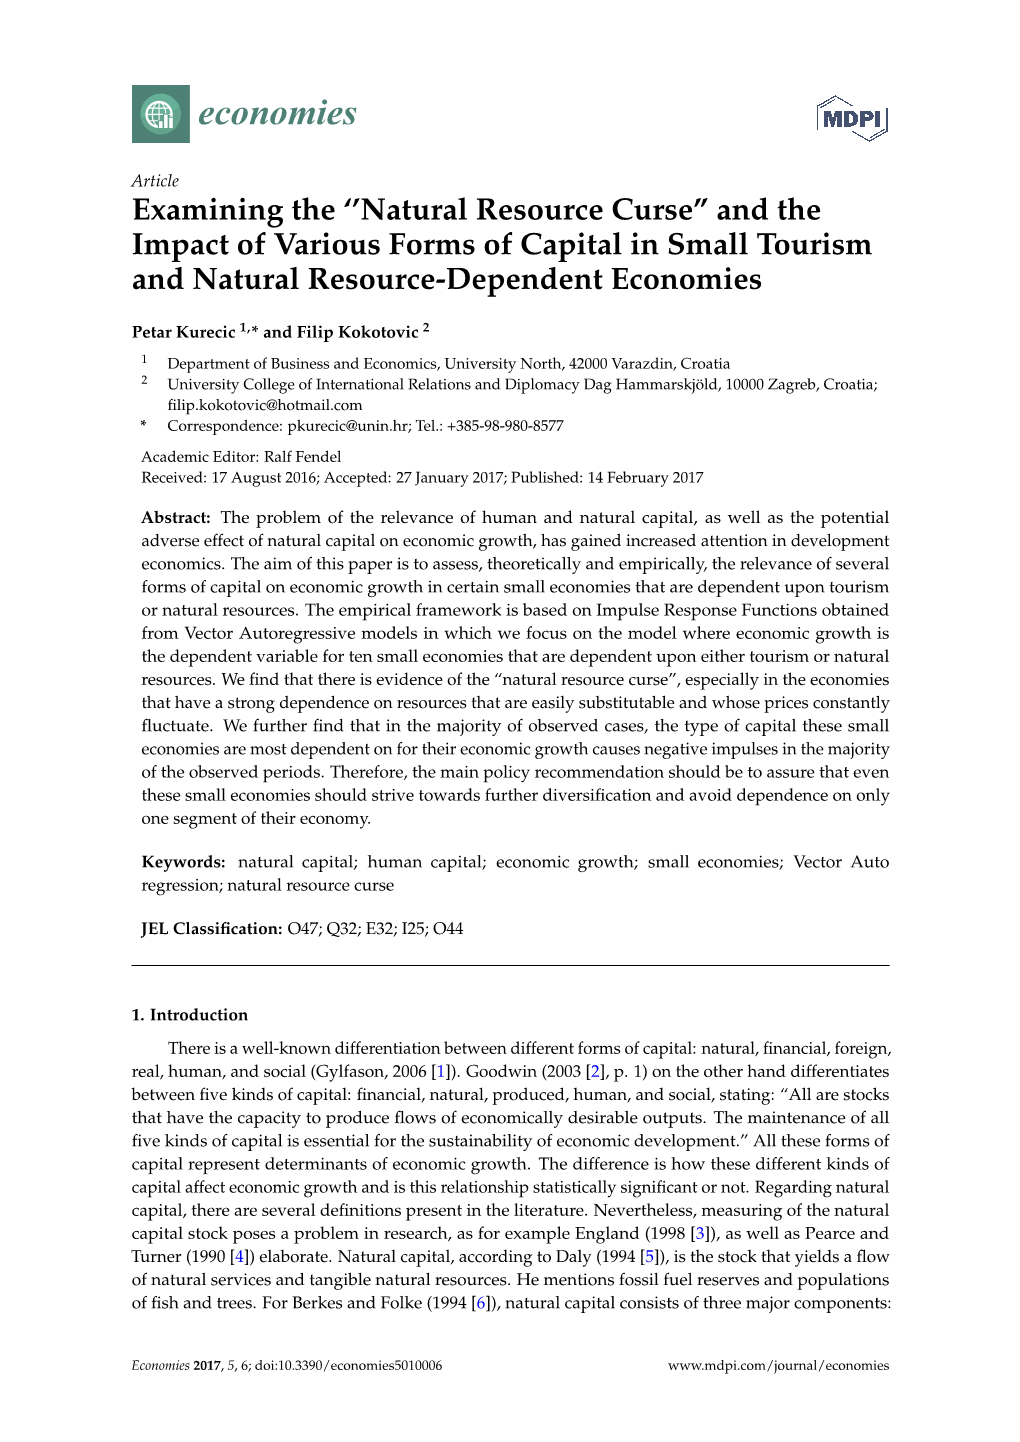 Natural Resource Curse” and the Impact of Various Forms of Capital in Small Tourism and Natural Resource-Dependent Economies